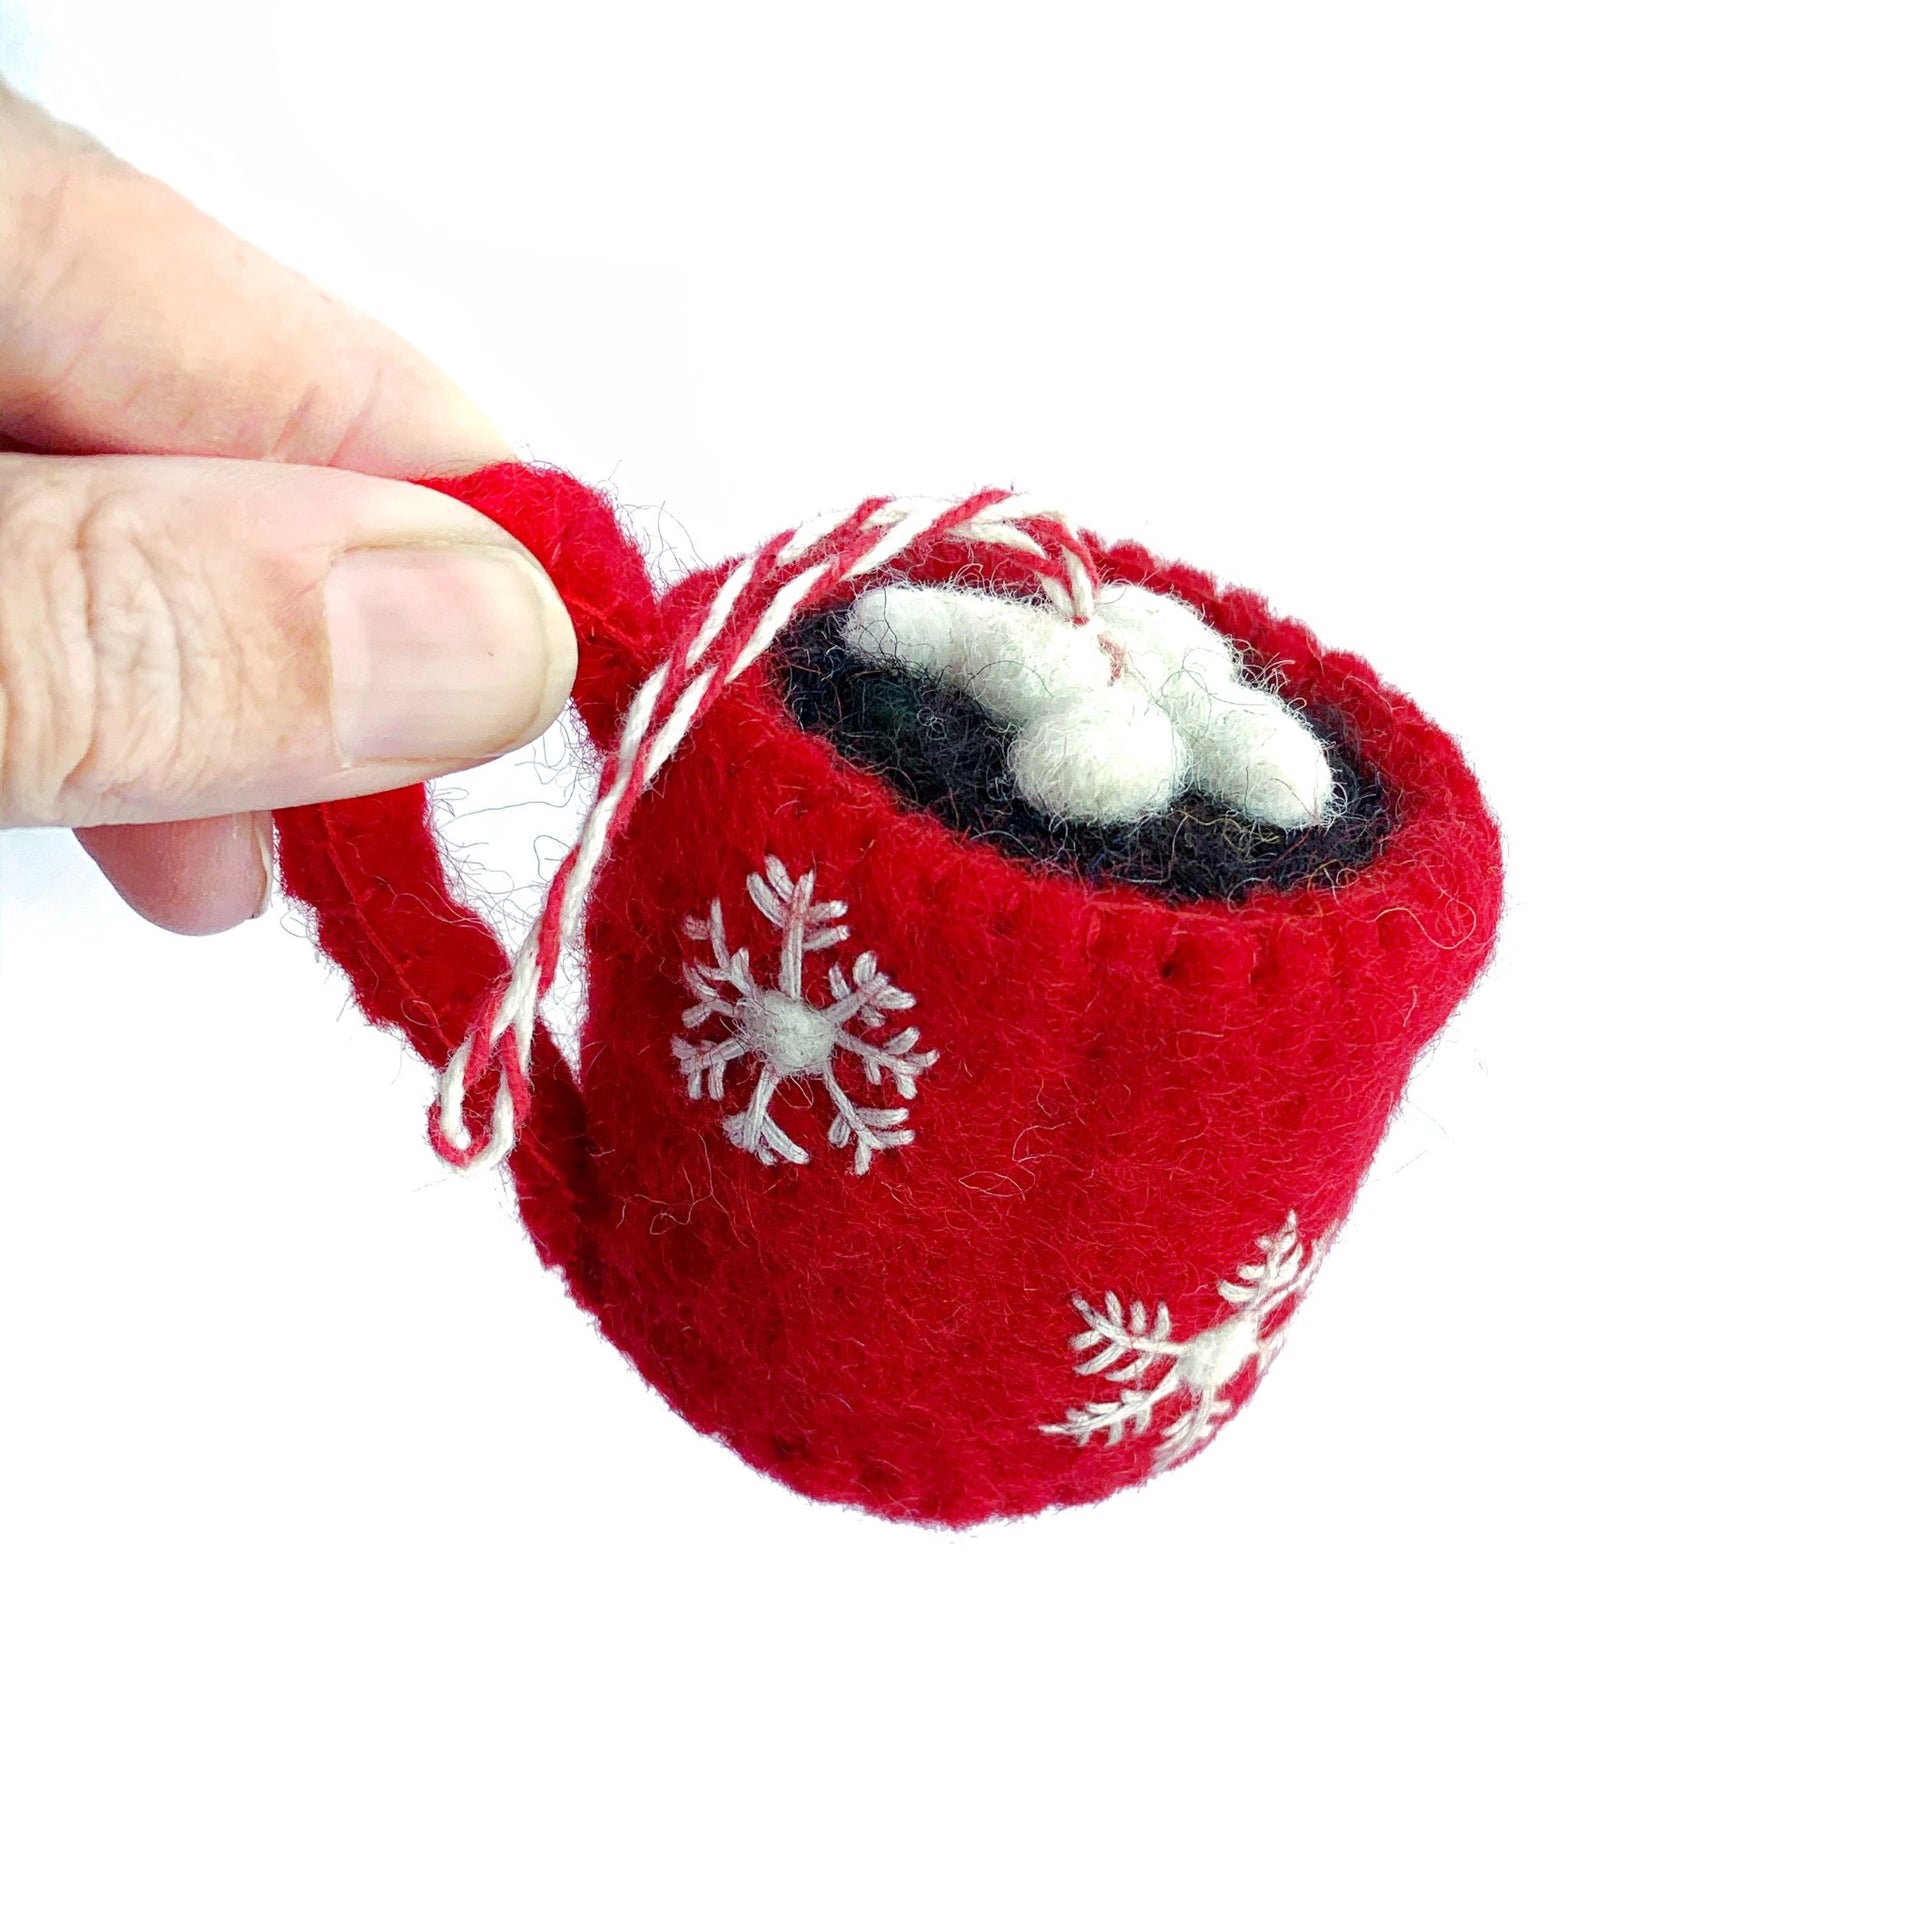 Holding Hot Chocolate Christmas Ornament in fingers